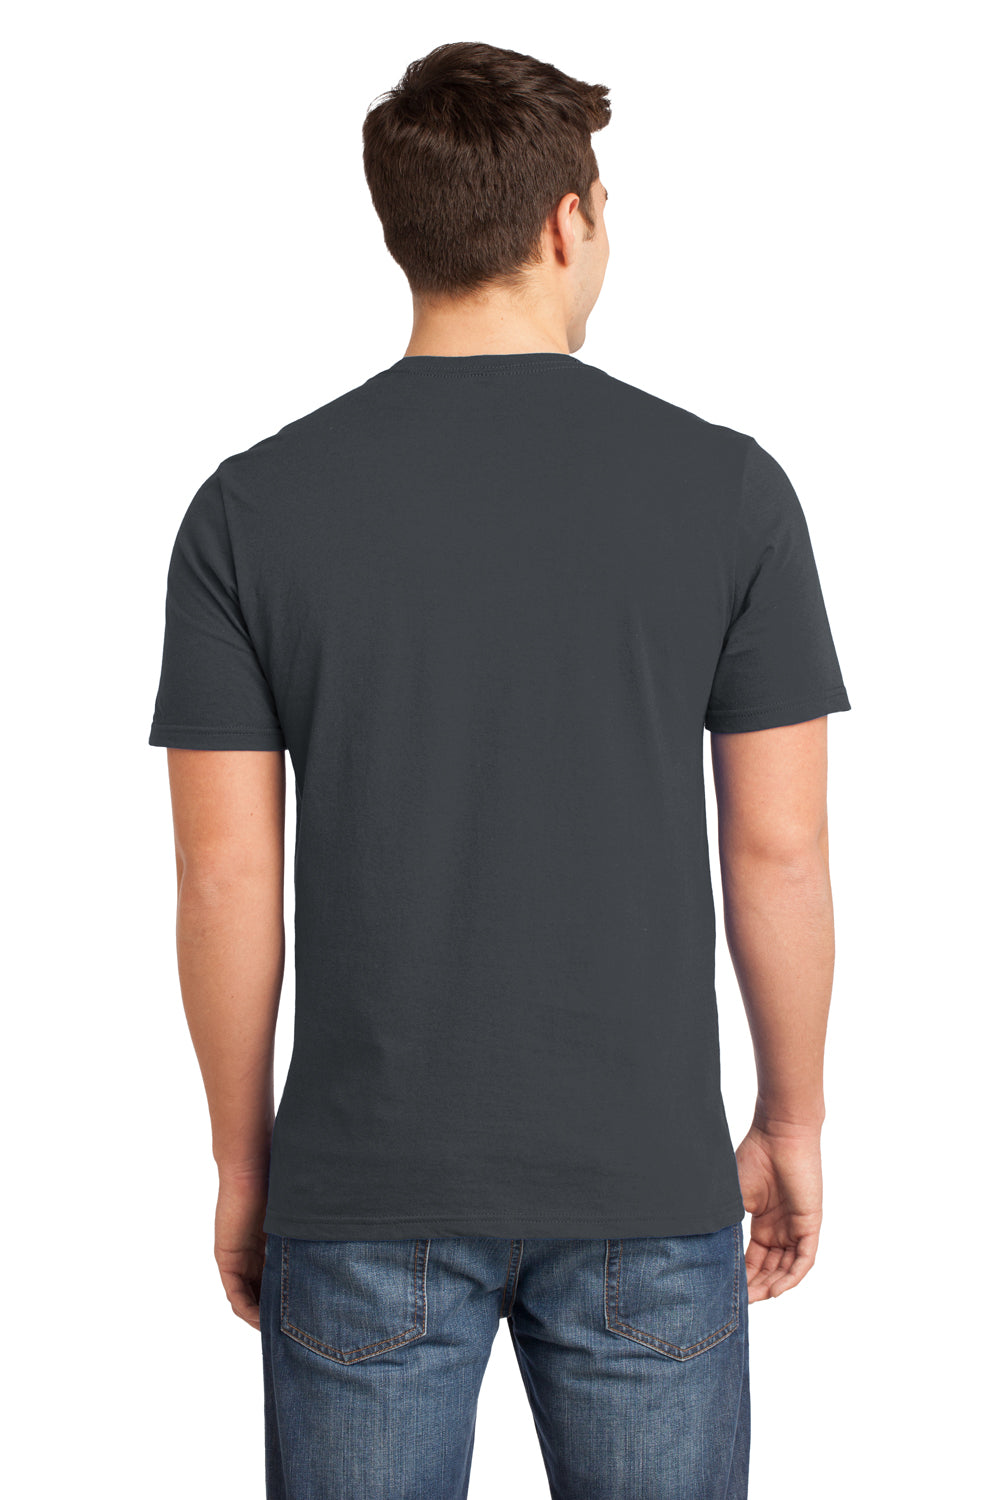 District DT6000 Mens Very Important Short Sleeve Crewneck T-Shirt Charcoal Grey Back